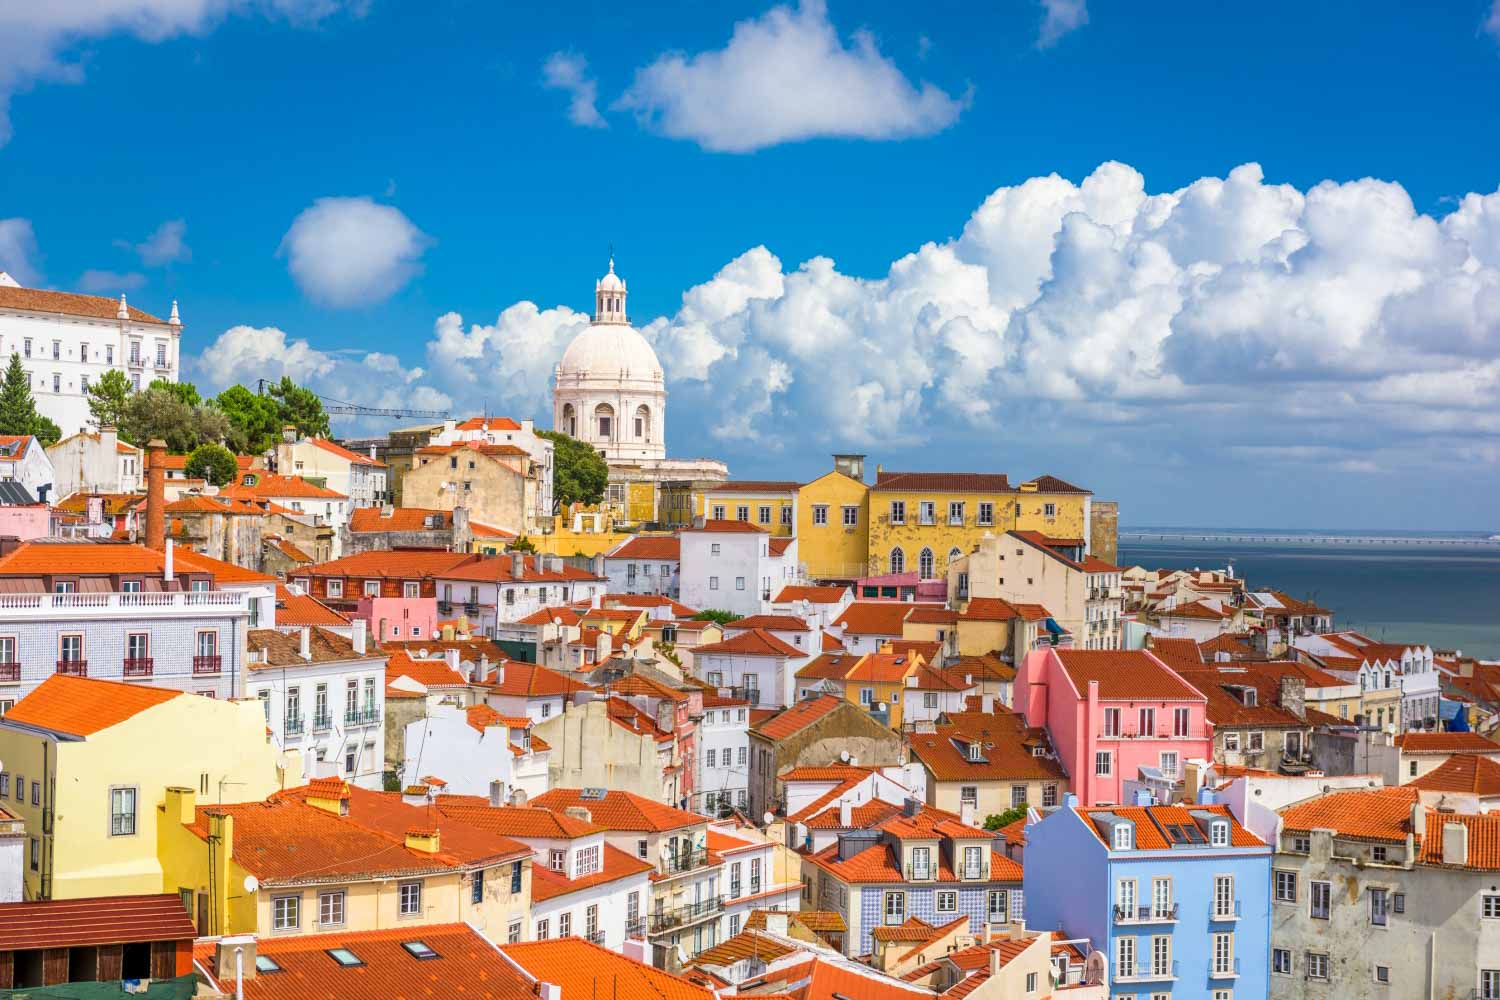 A view of the rooftops and brightly coloured buildings of the Alfama in Lisbon, Portugal - exploring the Moorish castle is one of my top things to do in Lisbon with kids